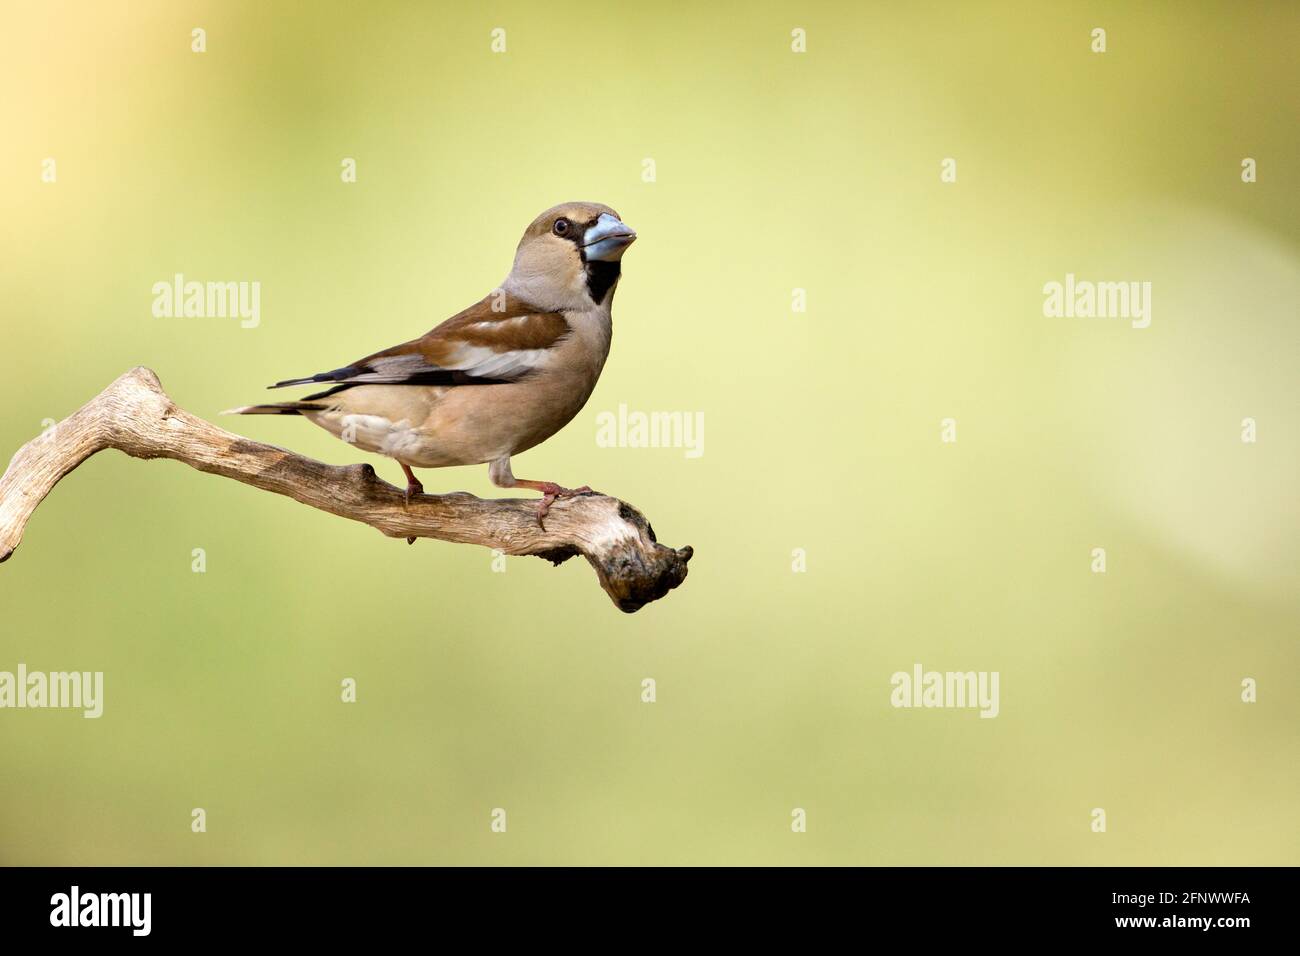 hawfinch (Coccothraustes coccothraustes) Stock Photo